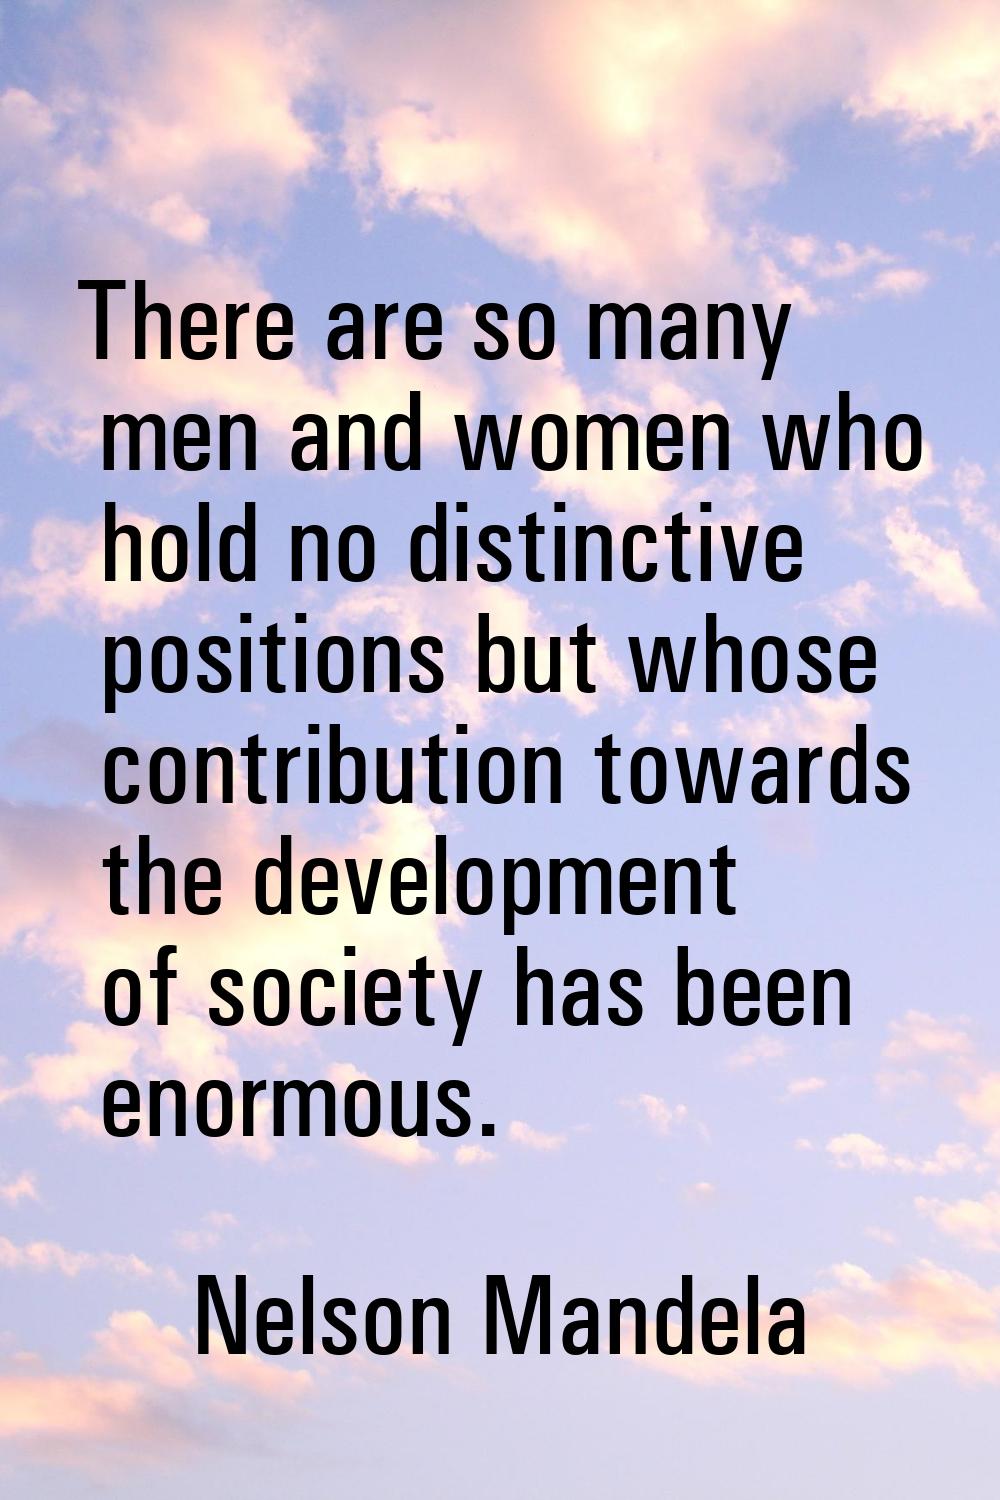 There are so many men and women who hold no distinctive positions but whose contribution towards th